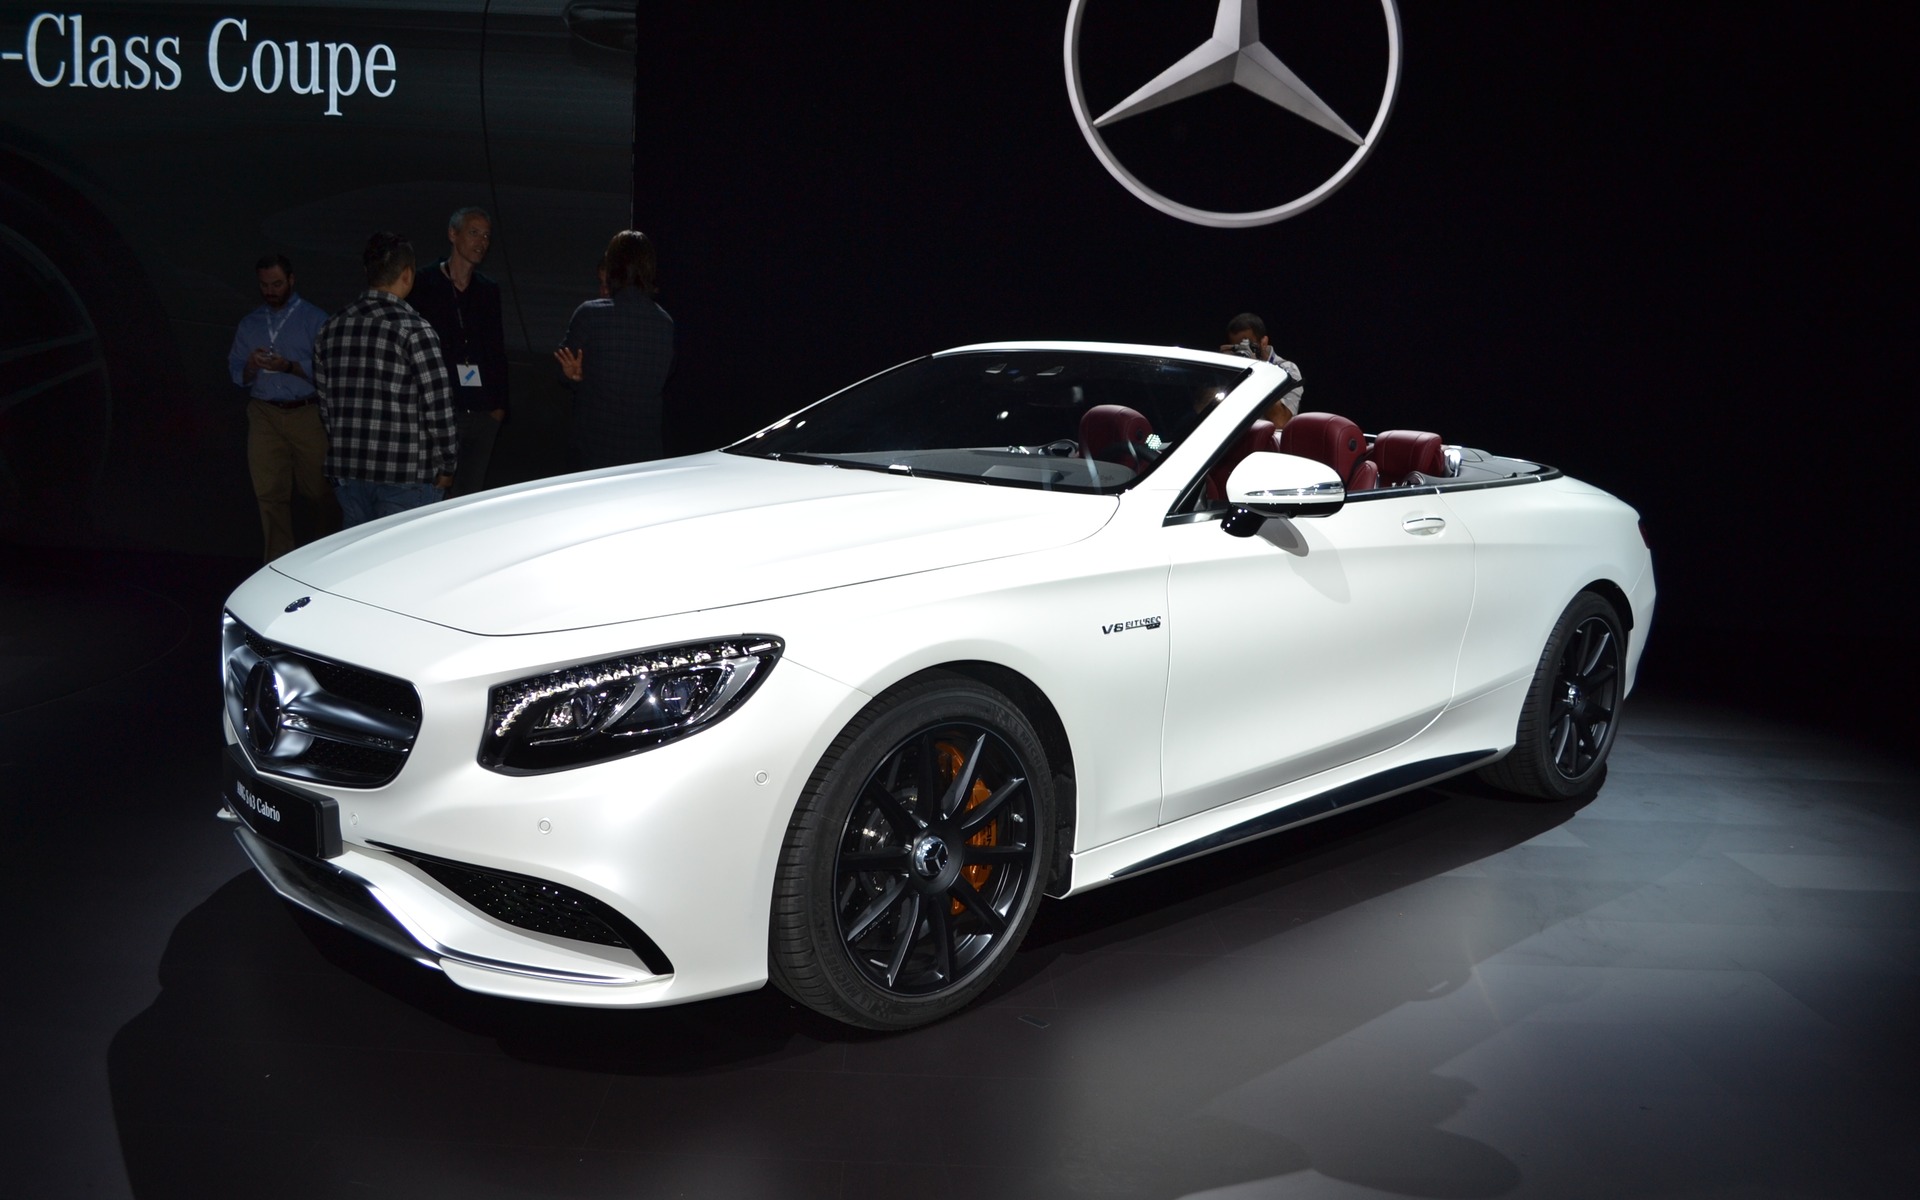 Mercedes Amg S63 Convertible Enjoy The Los Angeles Sun The Car Guide